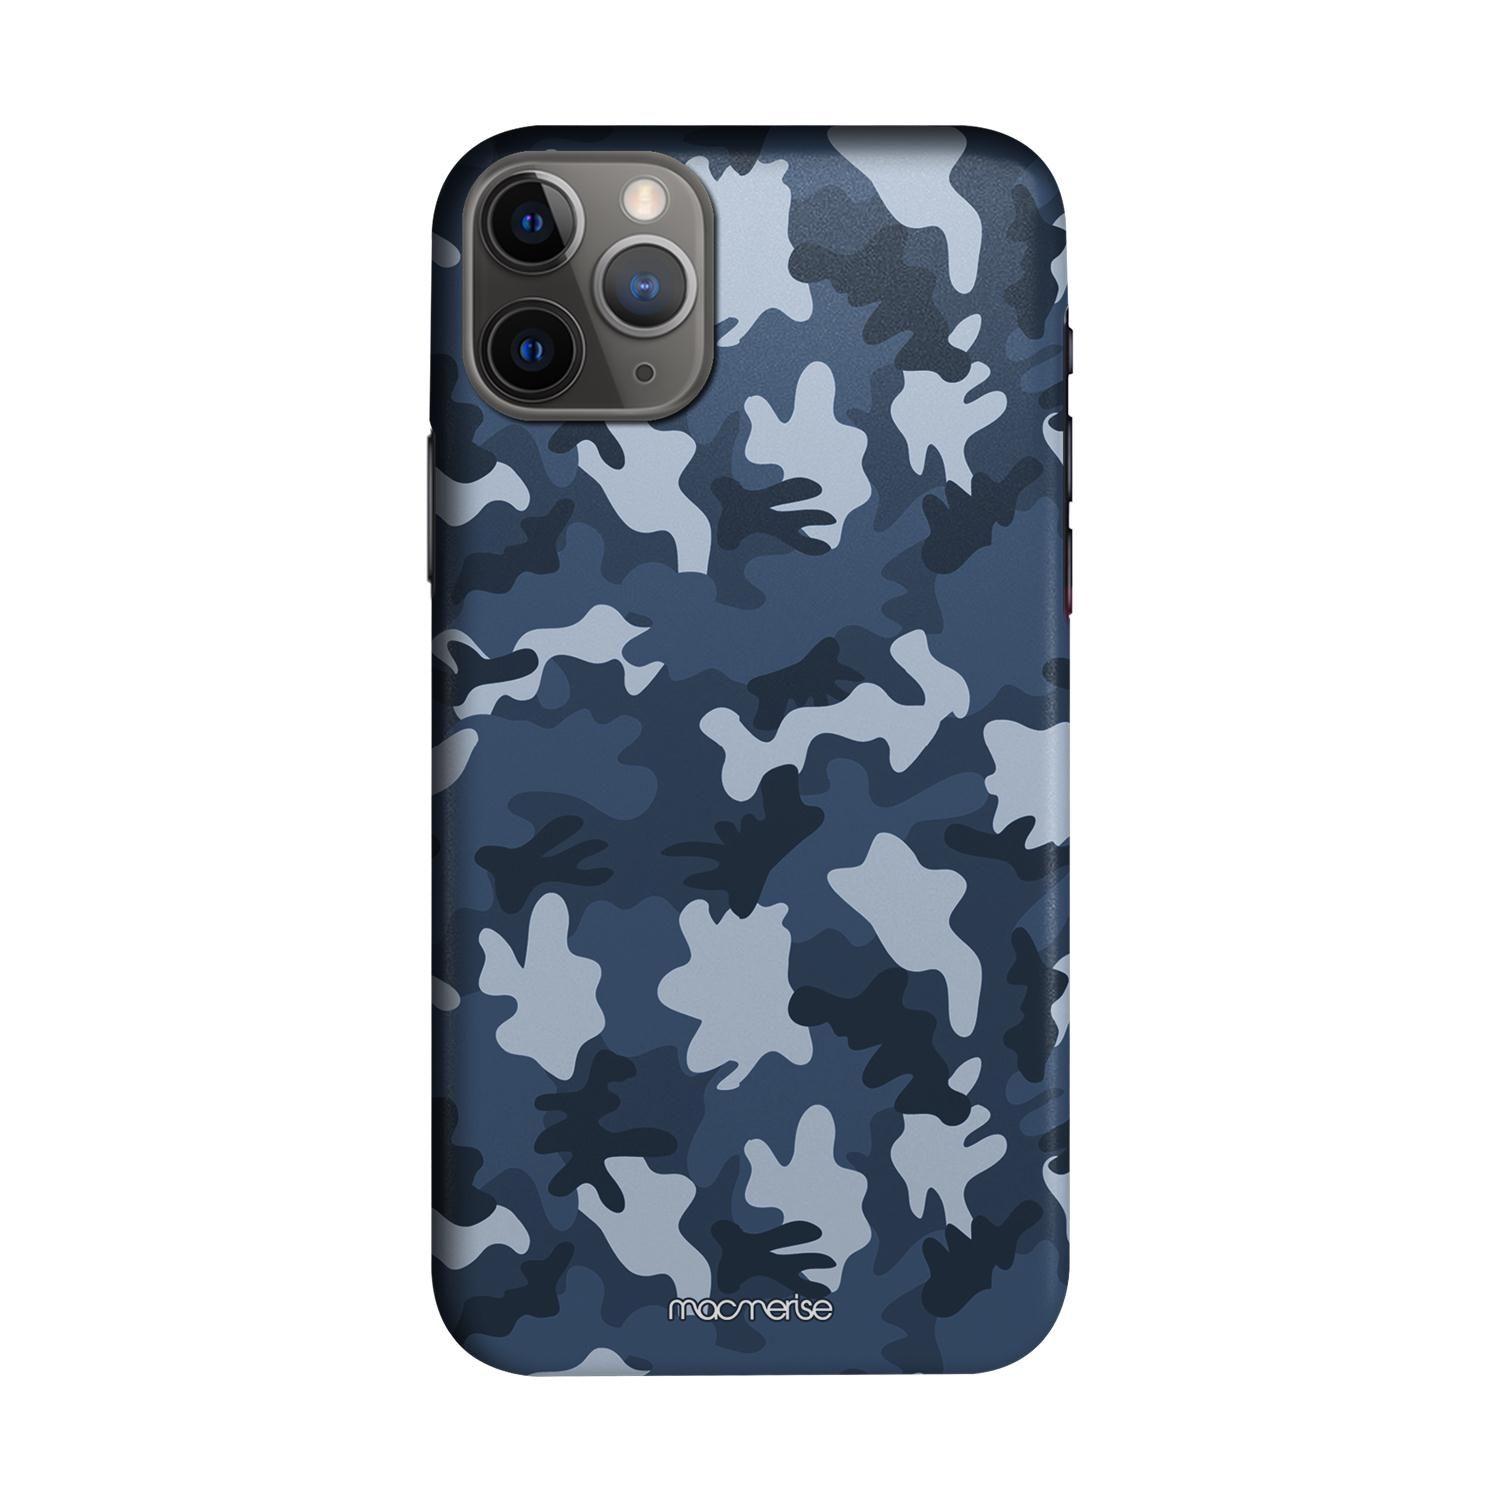 Buy Camo Blue - Sleek Phone Case for iPhone 11 Pro Max Online